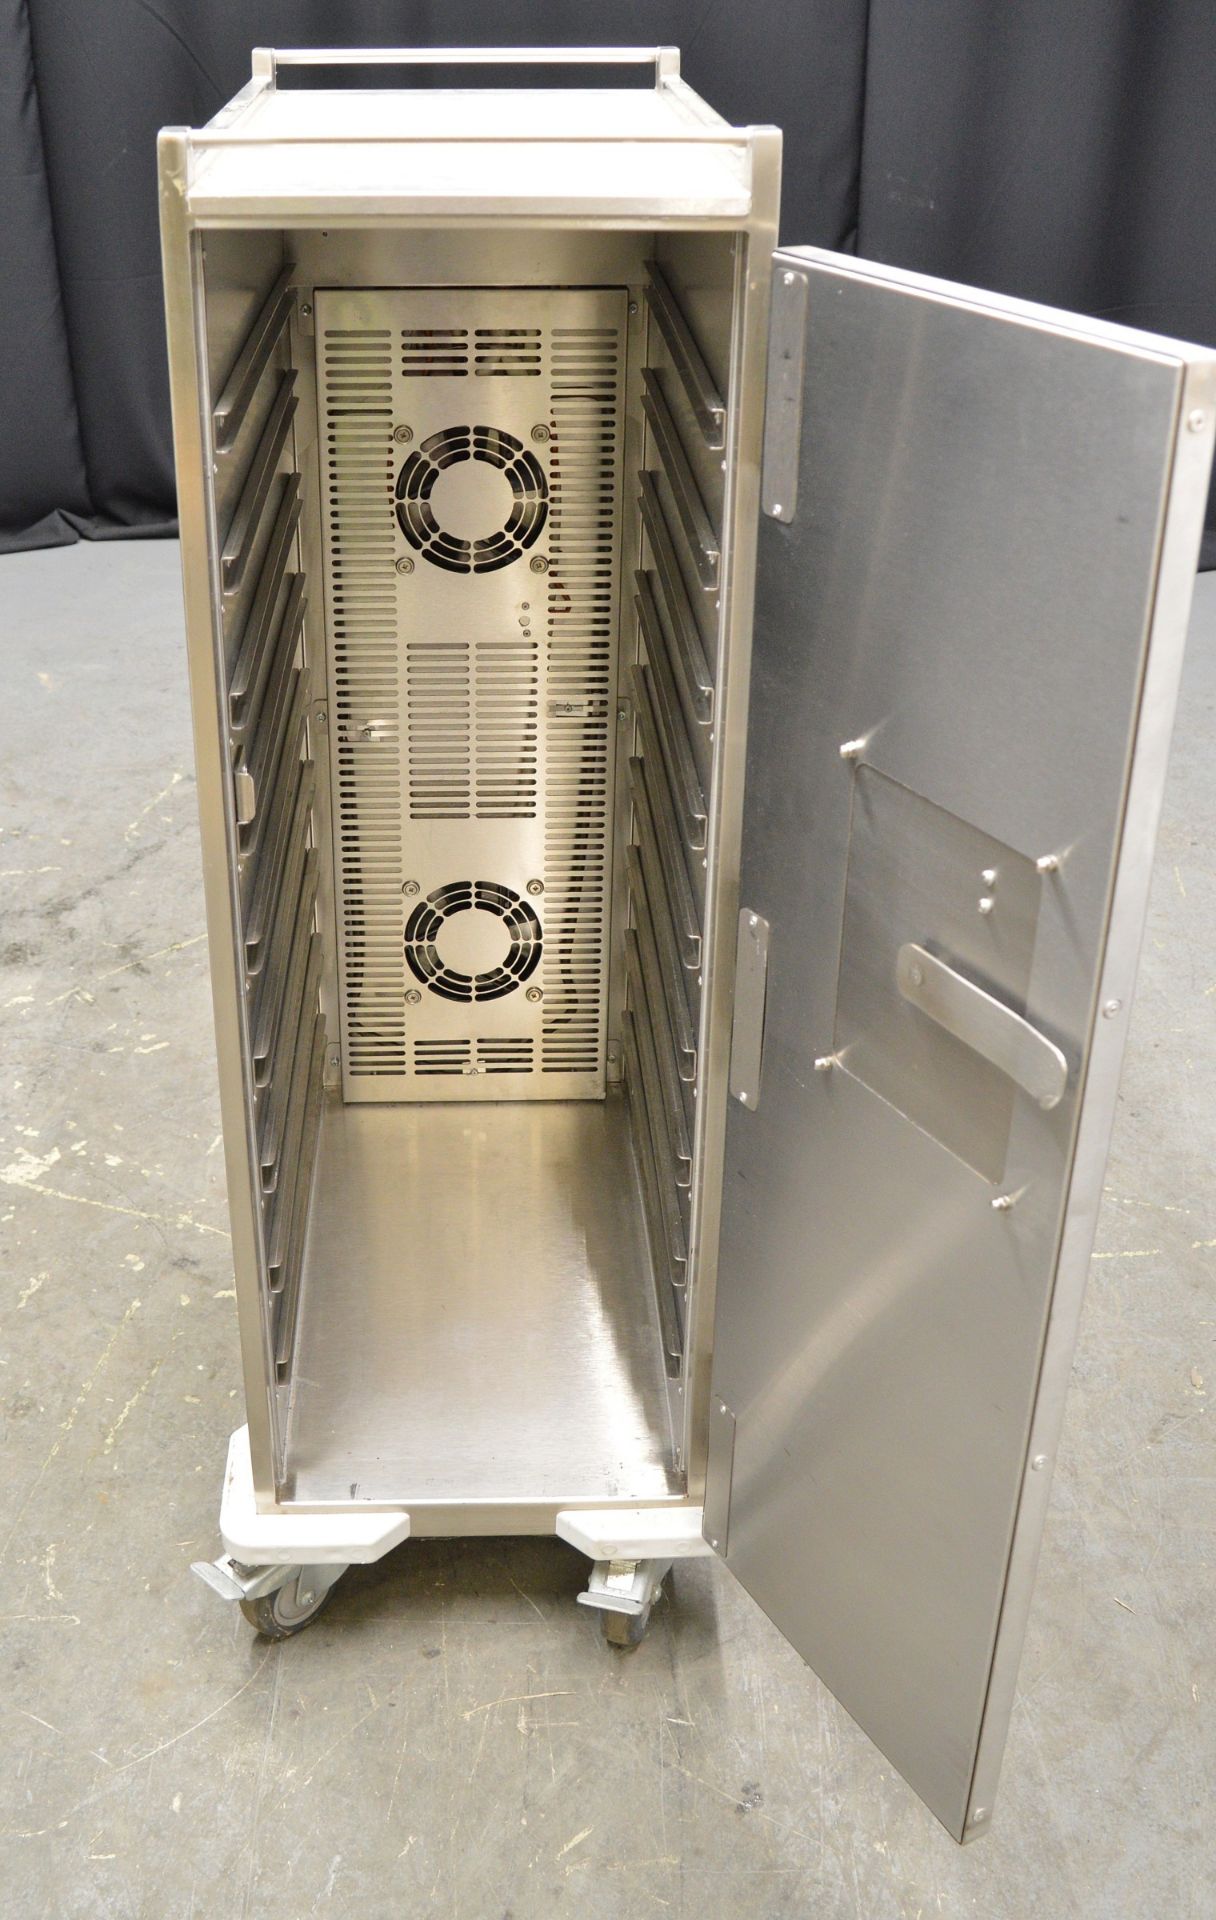 Spec Trolley with Tray Rack - 230v - Image 4 of 6